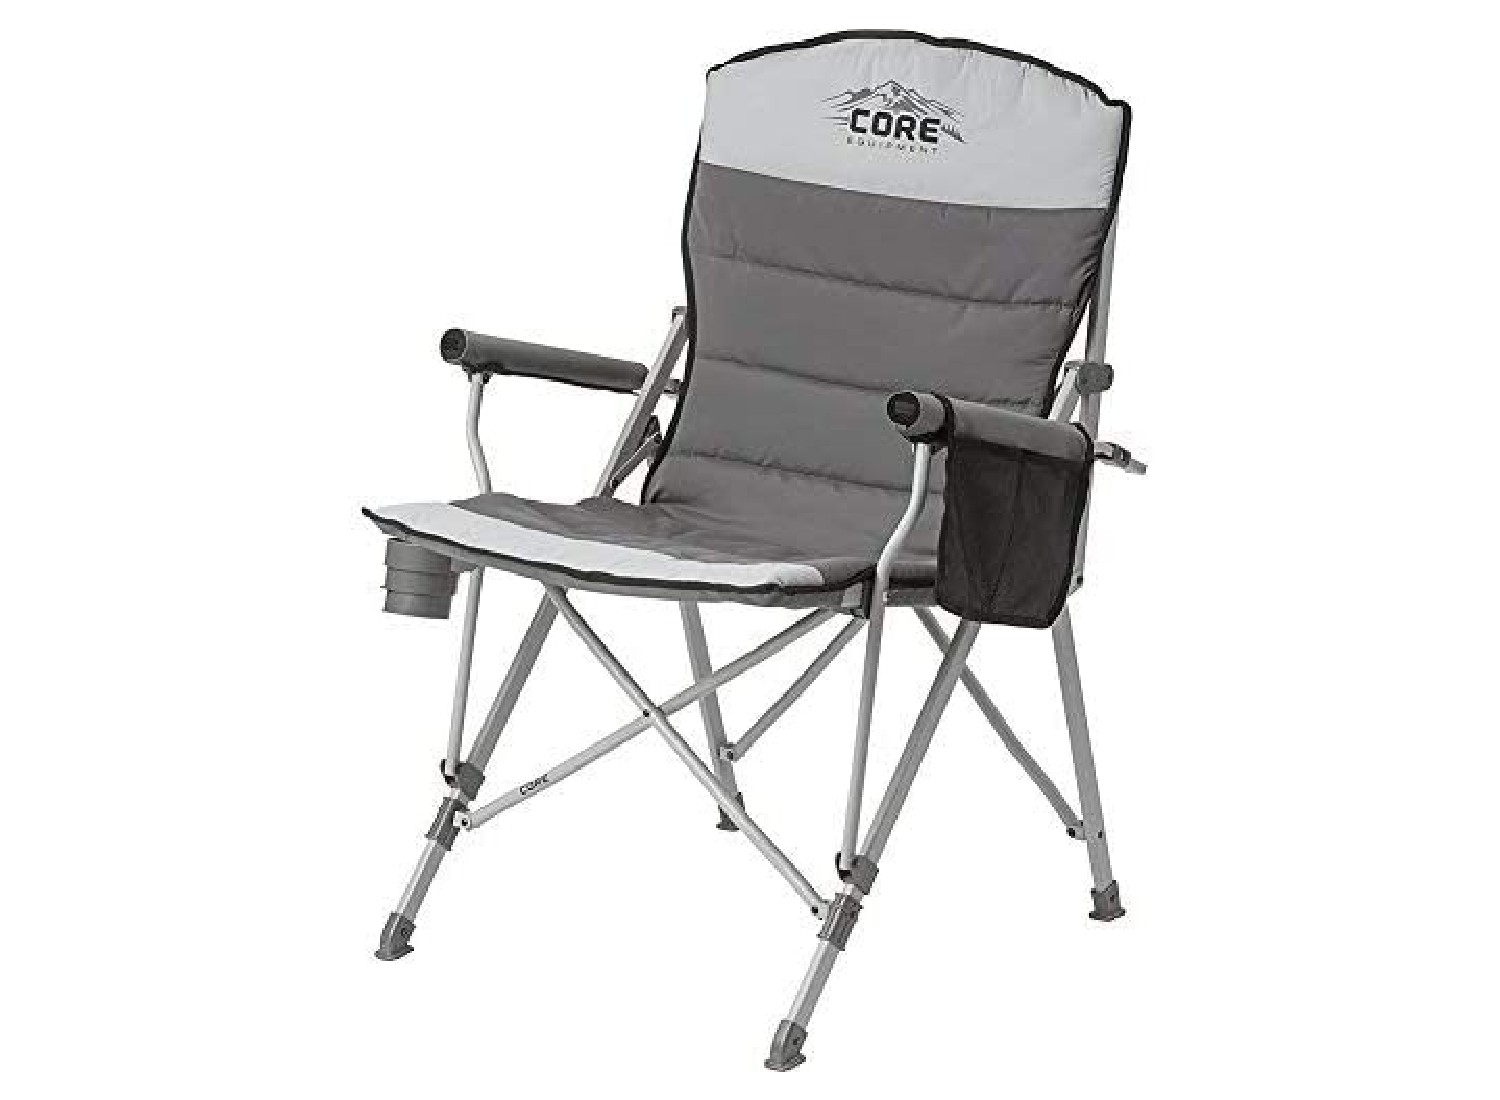 CORE Outdoor Folding Chair